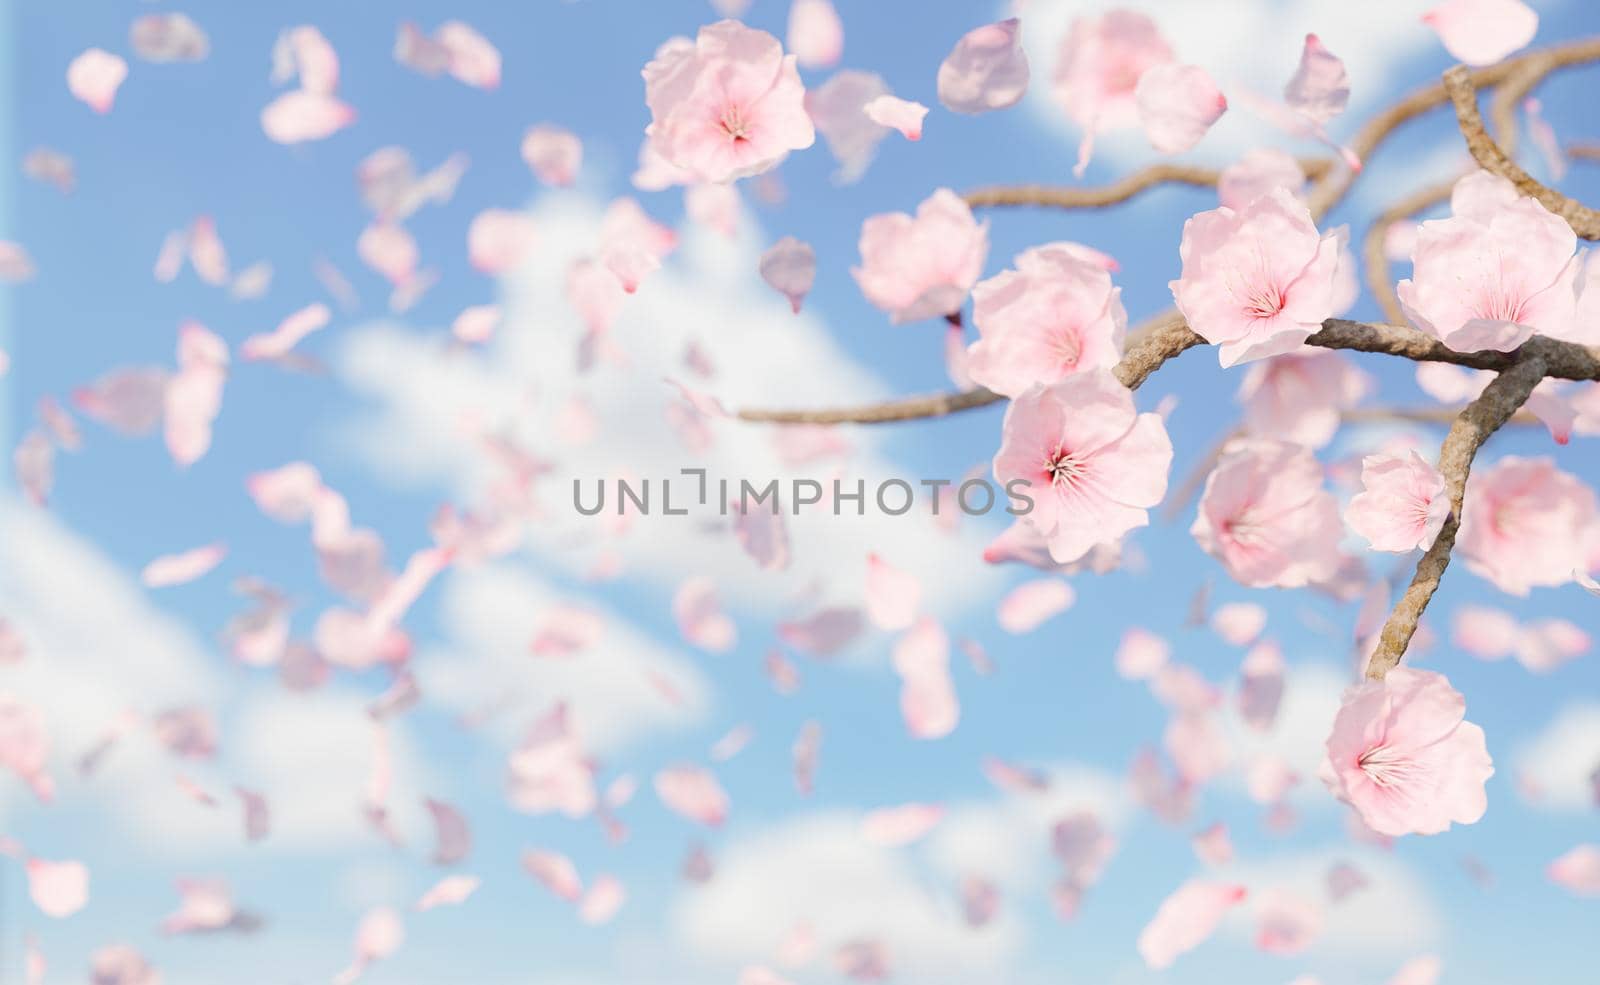 background of falling cherry blossoms and petals by asolano